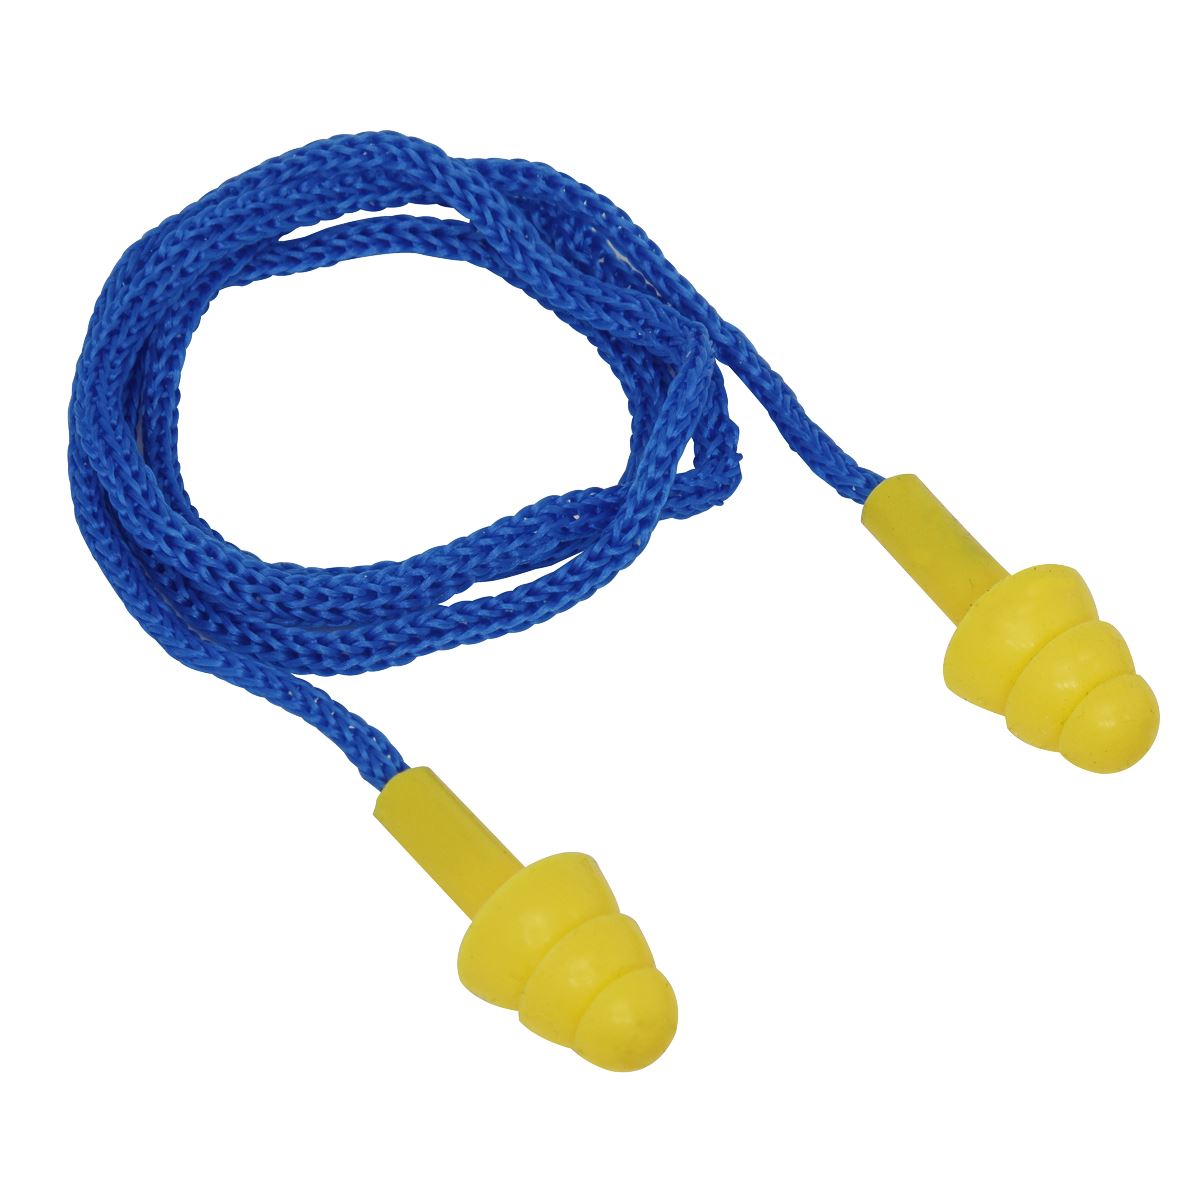 Worksafe by Sealey Corded Ear Plugs